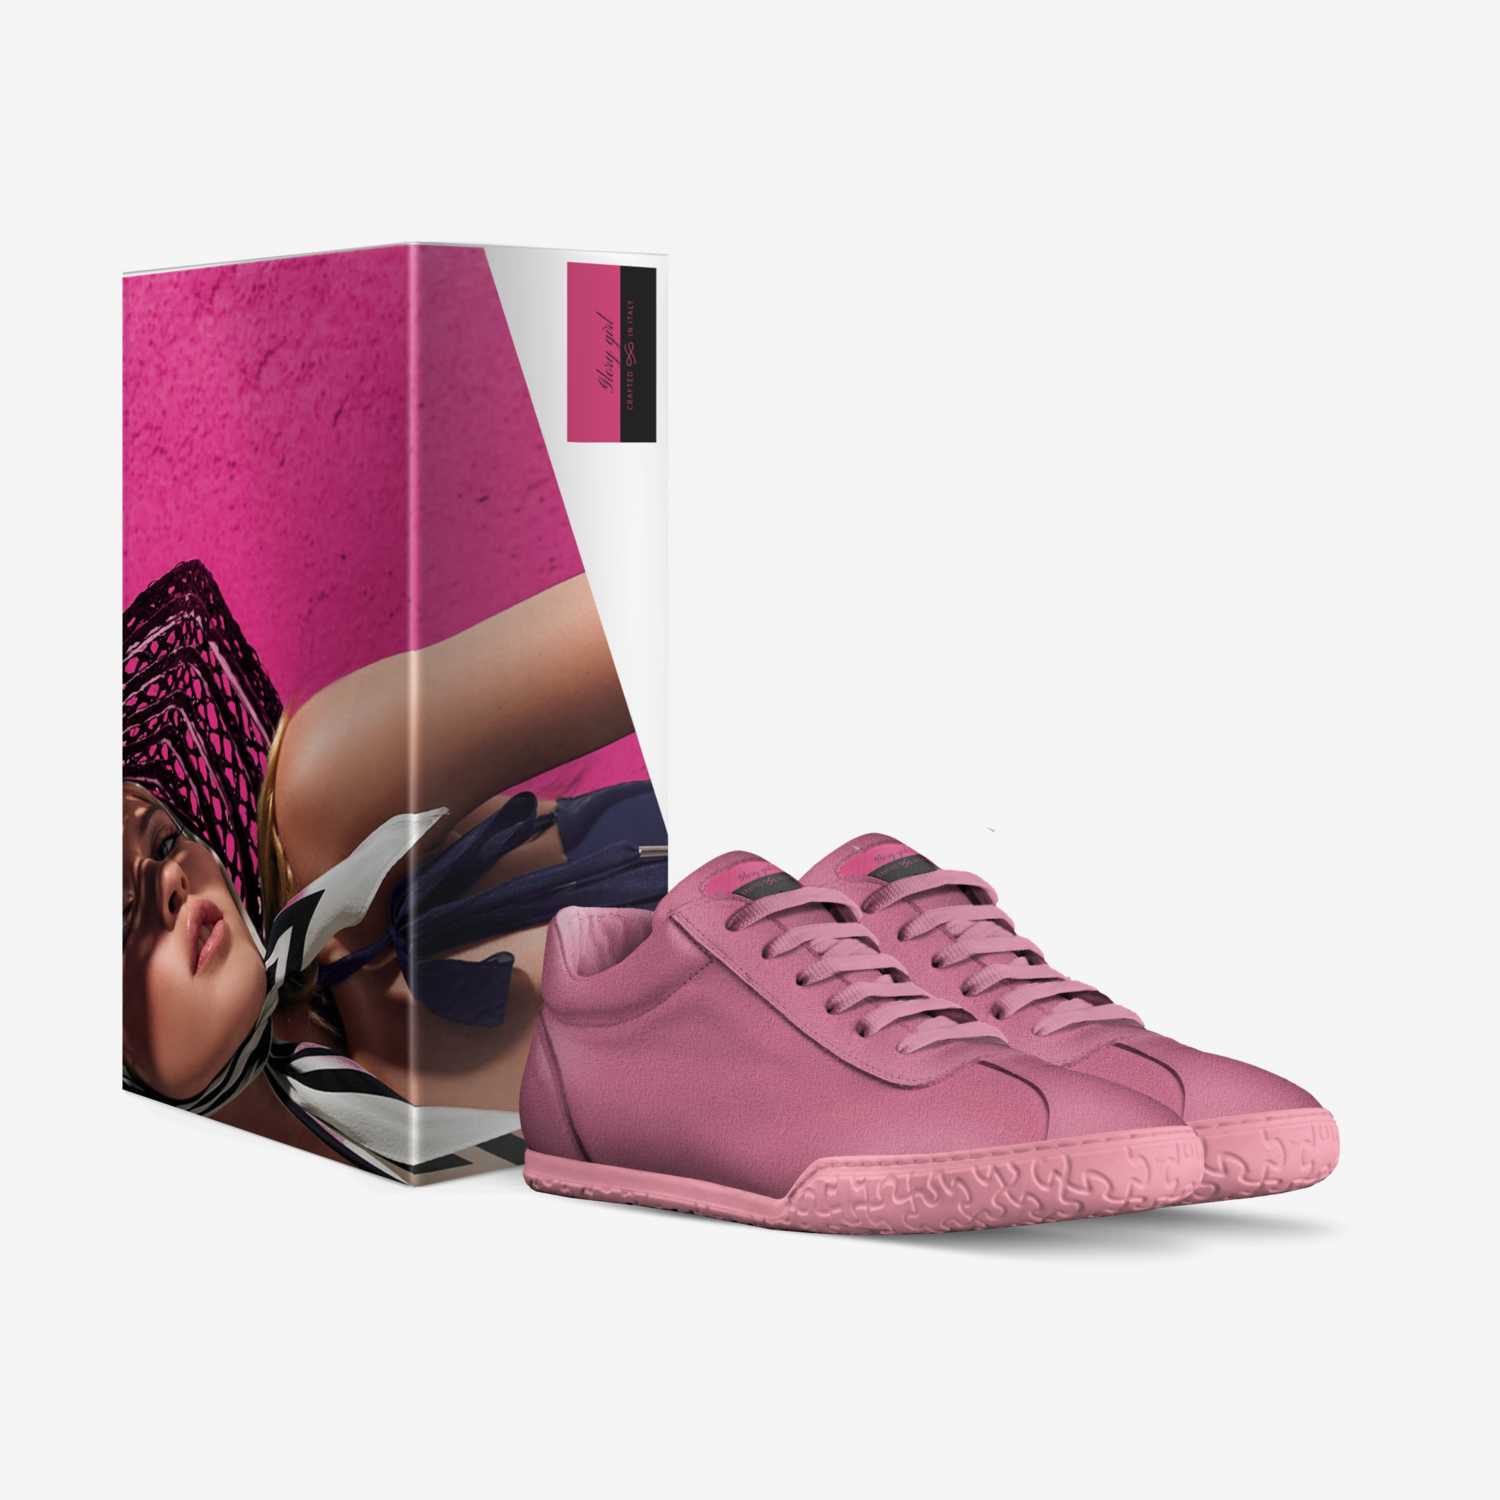 Glory girl custom made in Italy shoes by Bryson Alexander | Box view